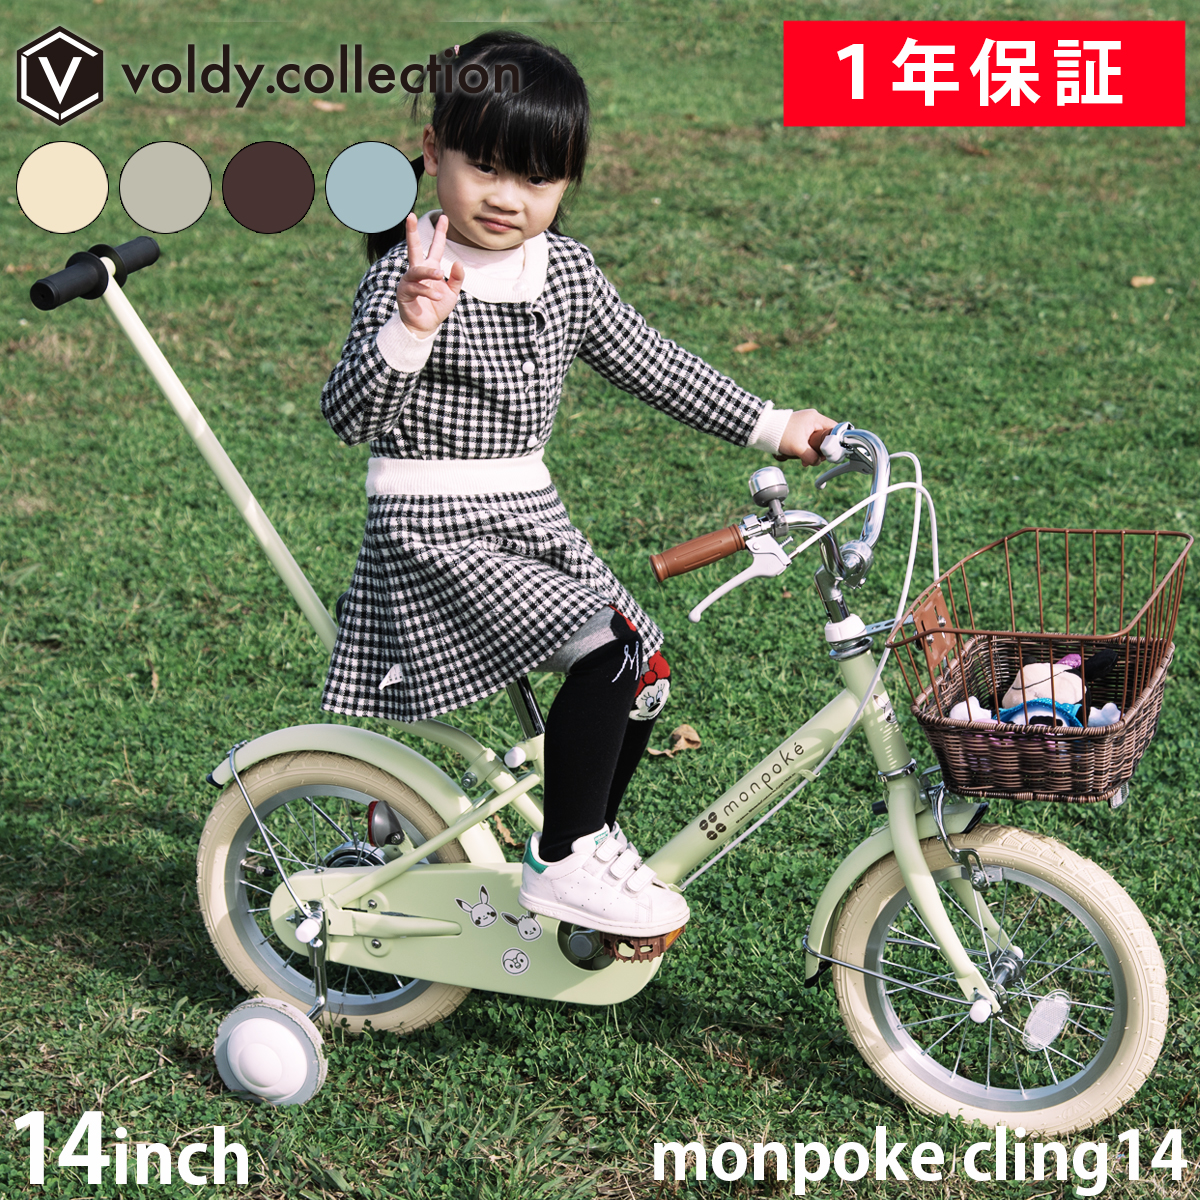 mompoke for children bicycle for infant for children 14 -inch assistance wheel hand pushed . stick attaching 3 -years old 4 -years old 5 -years old 6 -years old 7 -years old girl man Pokemon the first official baby brand monpoke Bike cling14